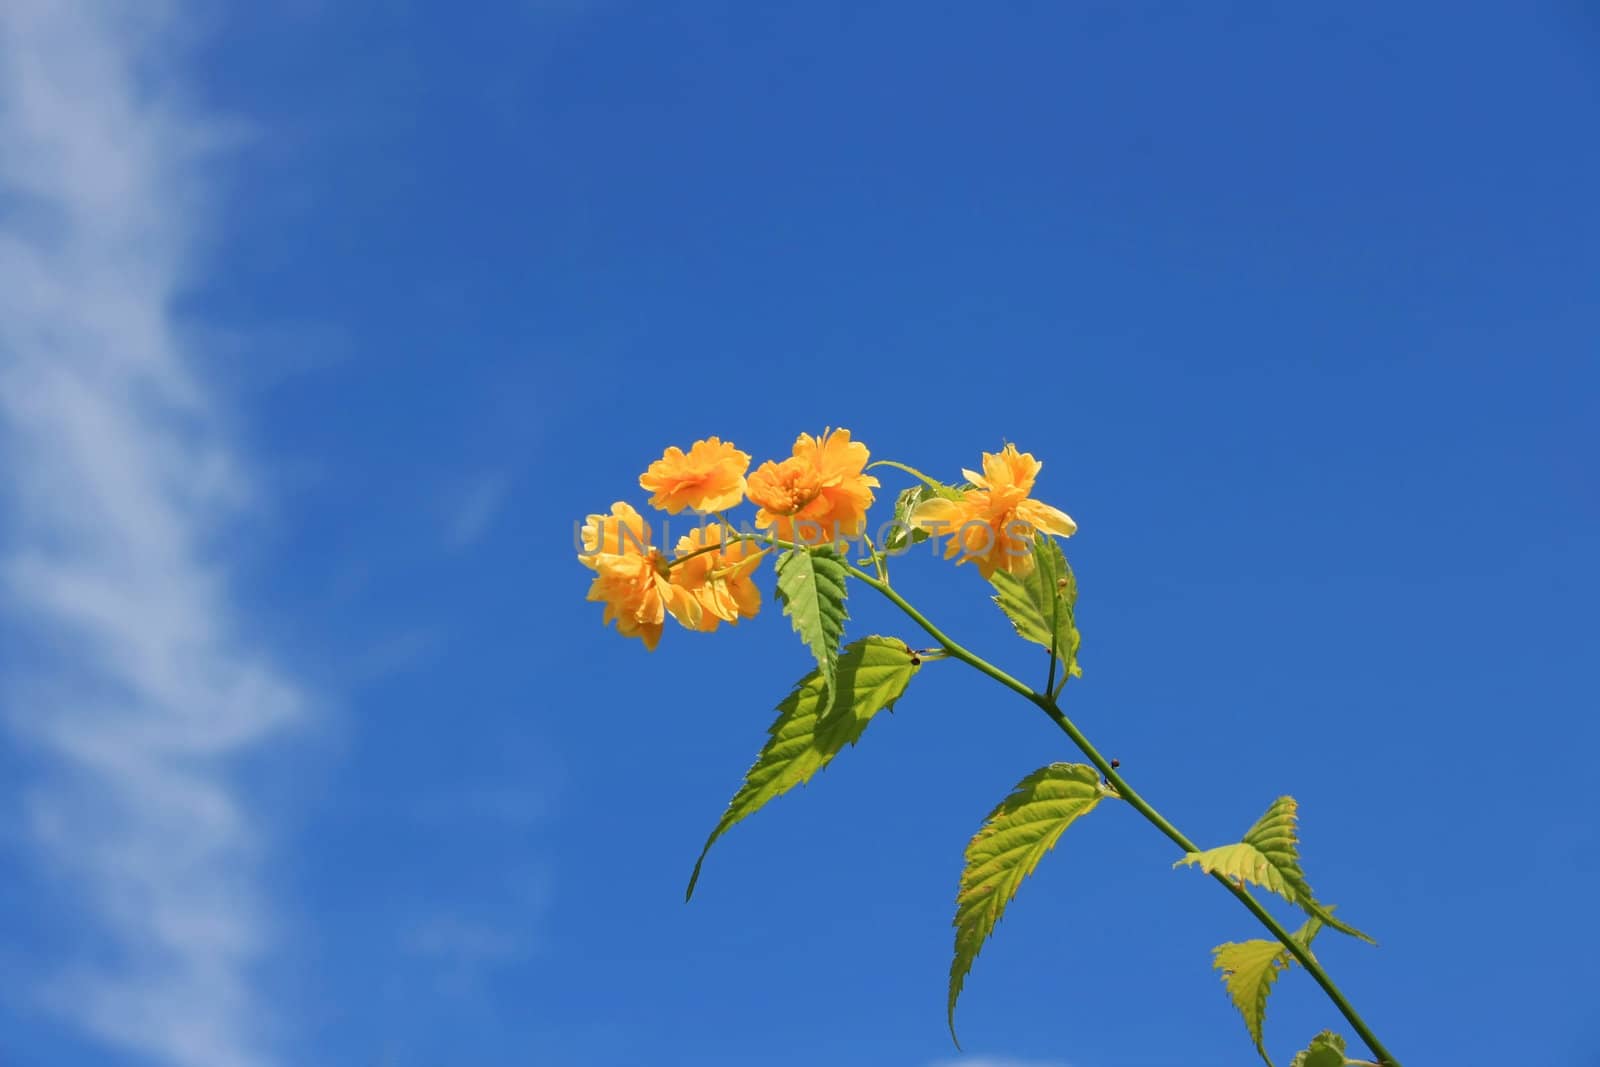 This image shows a yellow flower with sky